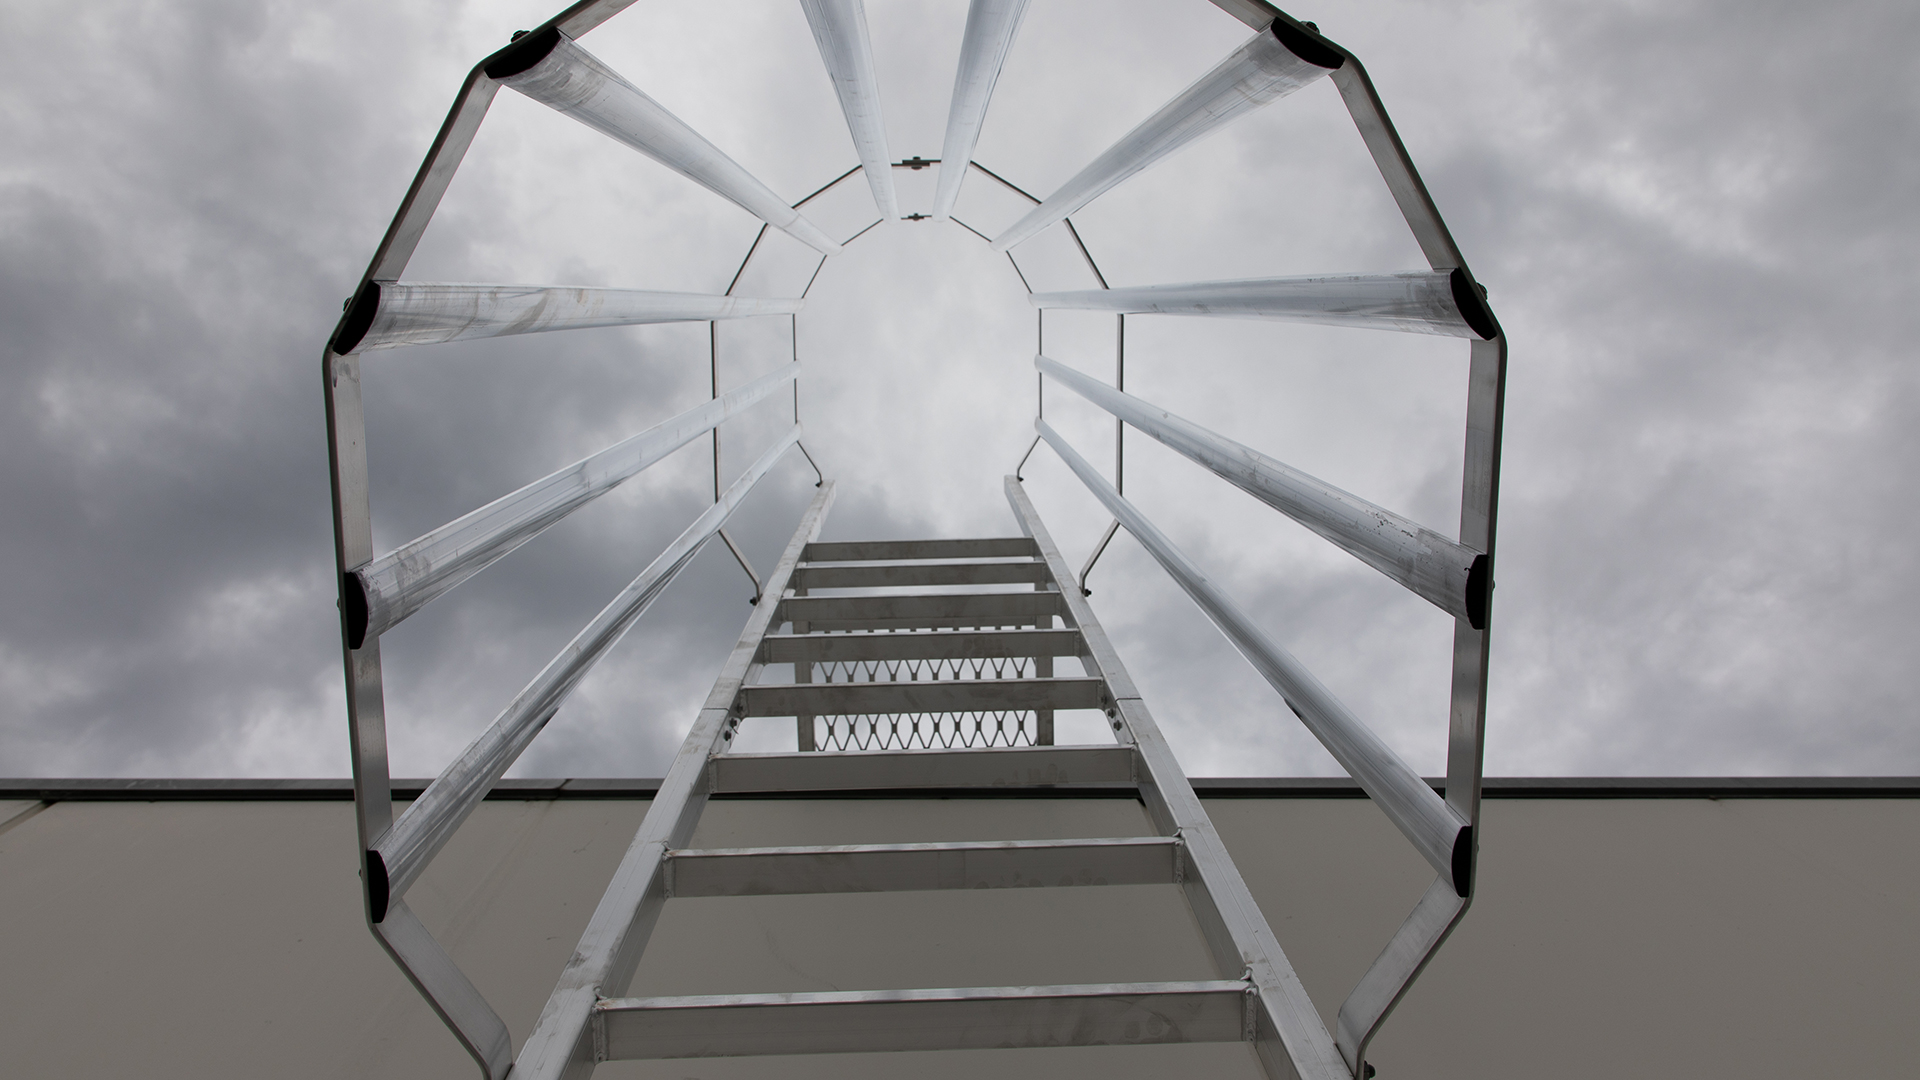 Ladder cages and vertical ladder lines: what and why